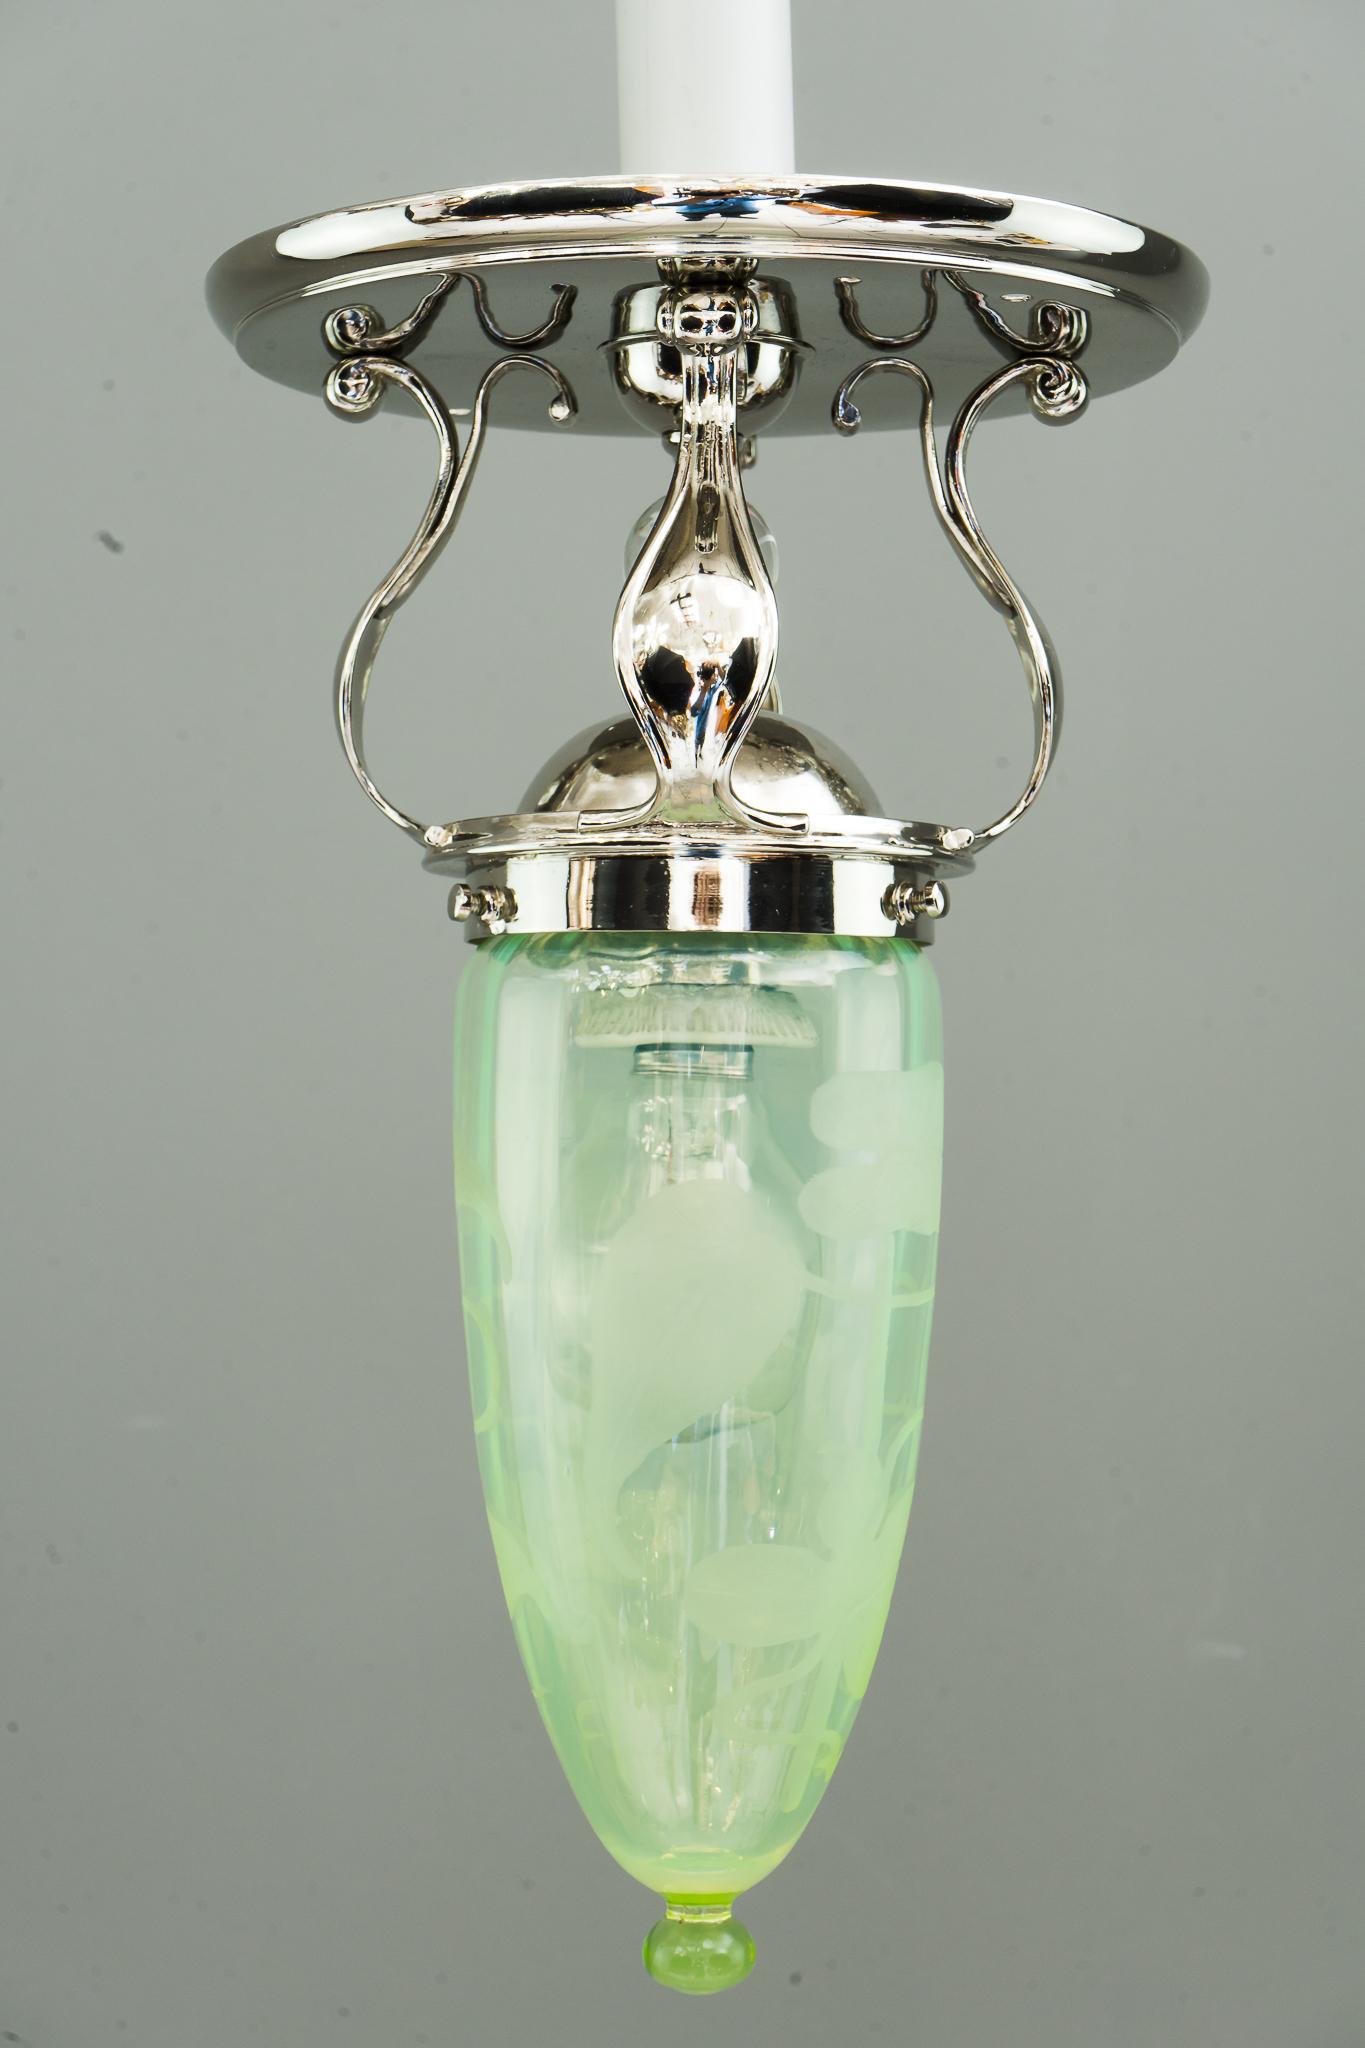 Early 20th Century Art Deco Ceiling Lamp with Original Old Opaline Glass Shade, circa 1920s